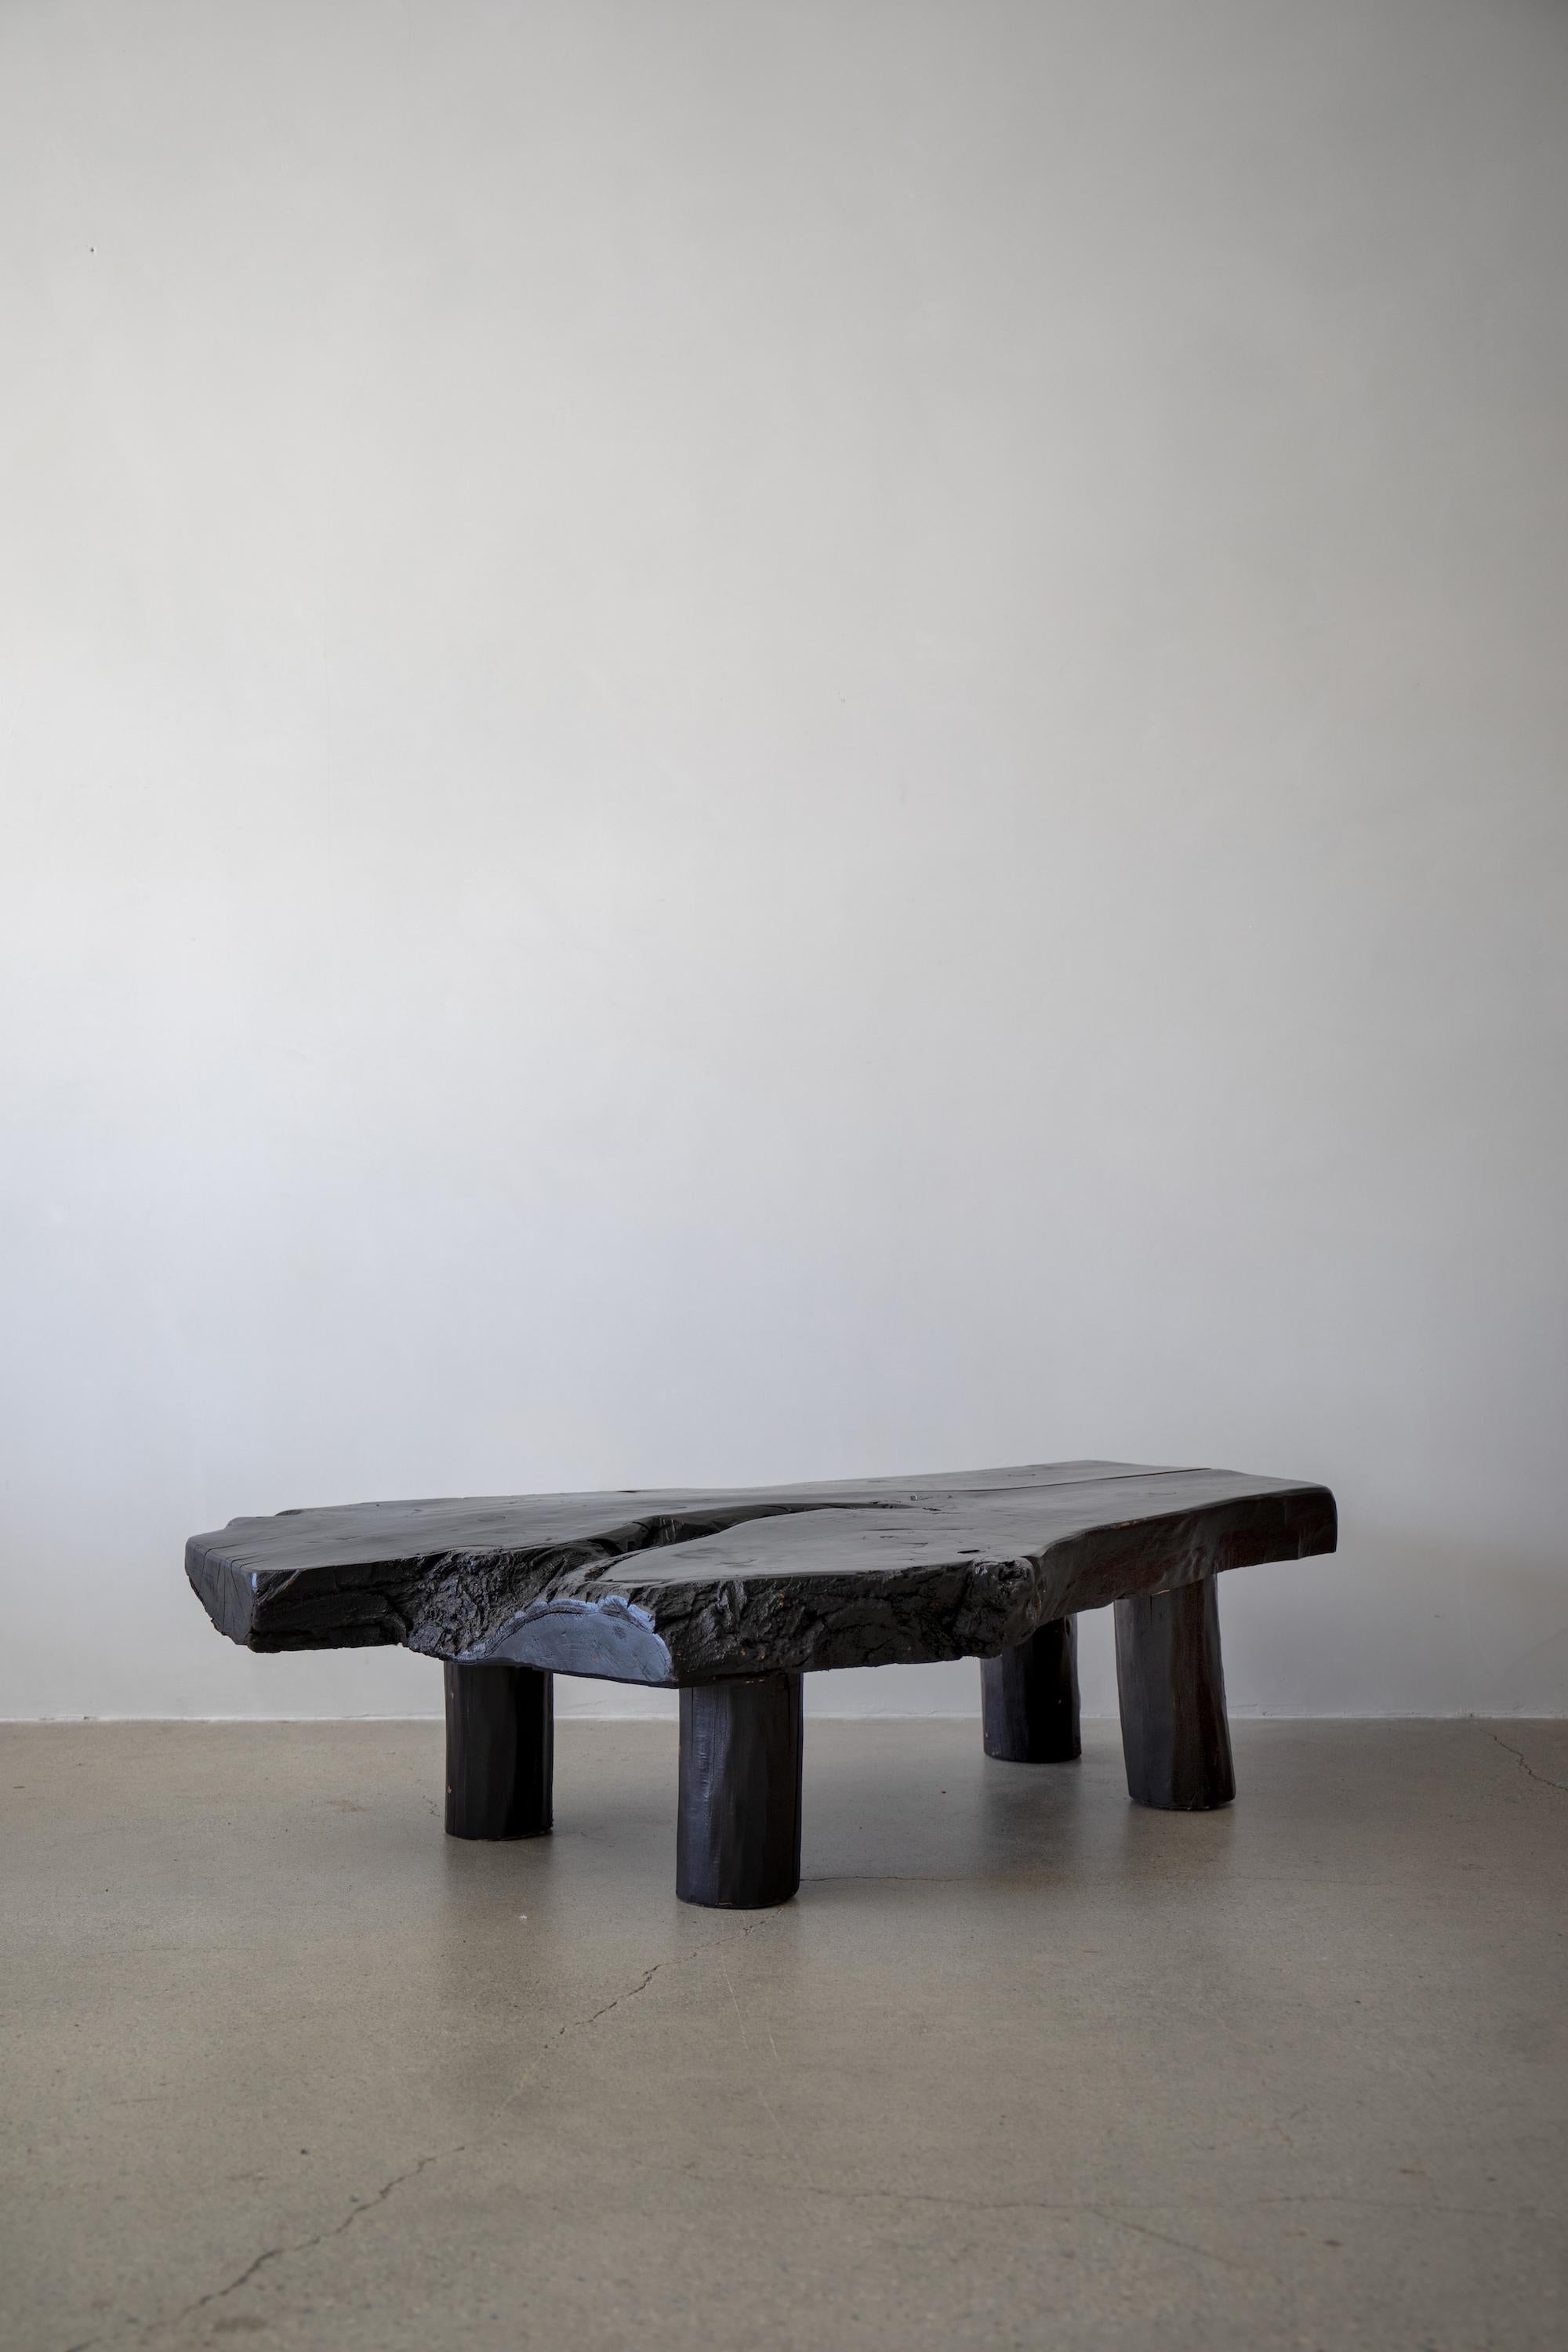 France, 1970s

Wood slab top with mortise and tenon joinery and pole legs in multi-layered black finish. Rustic yet refined coffee table.

Condition - wear consistent with age.

